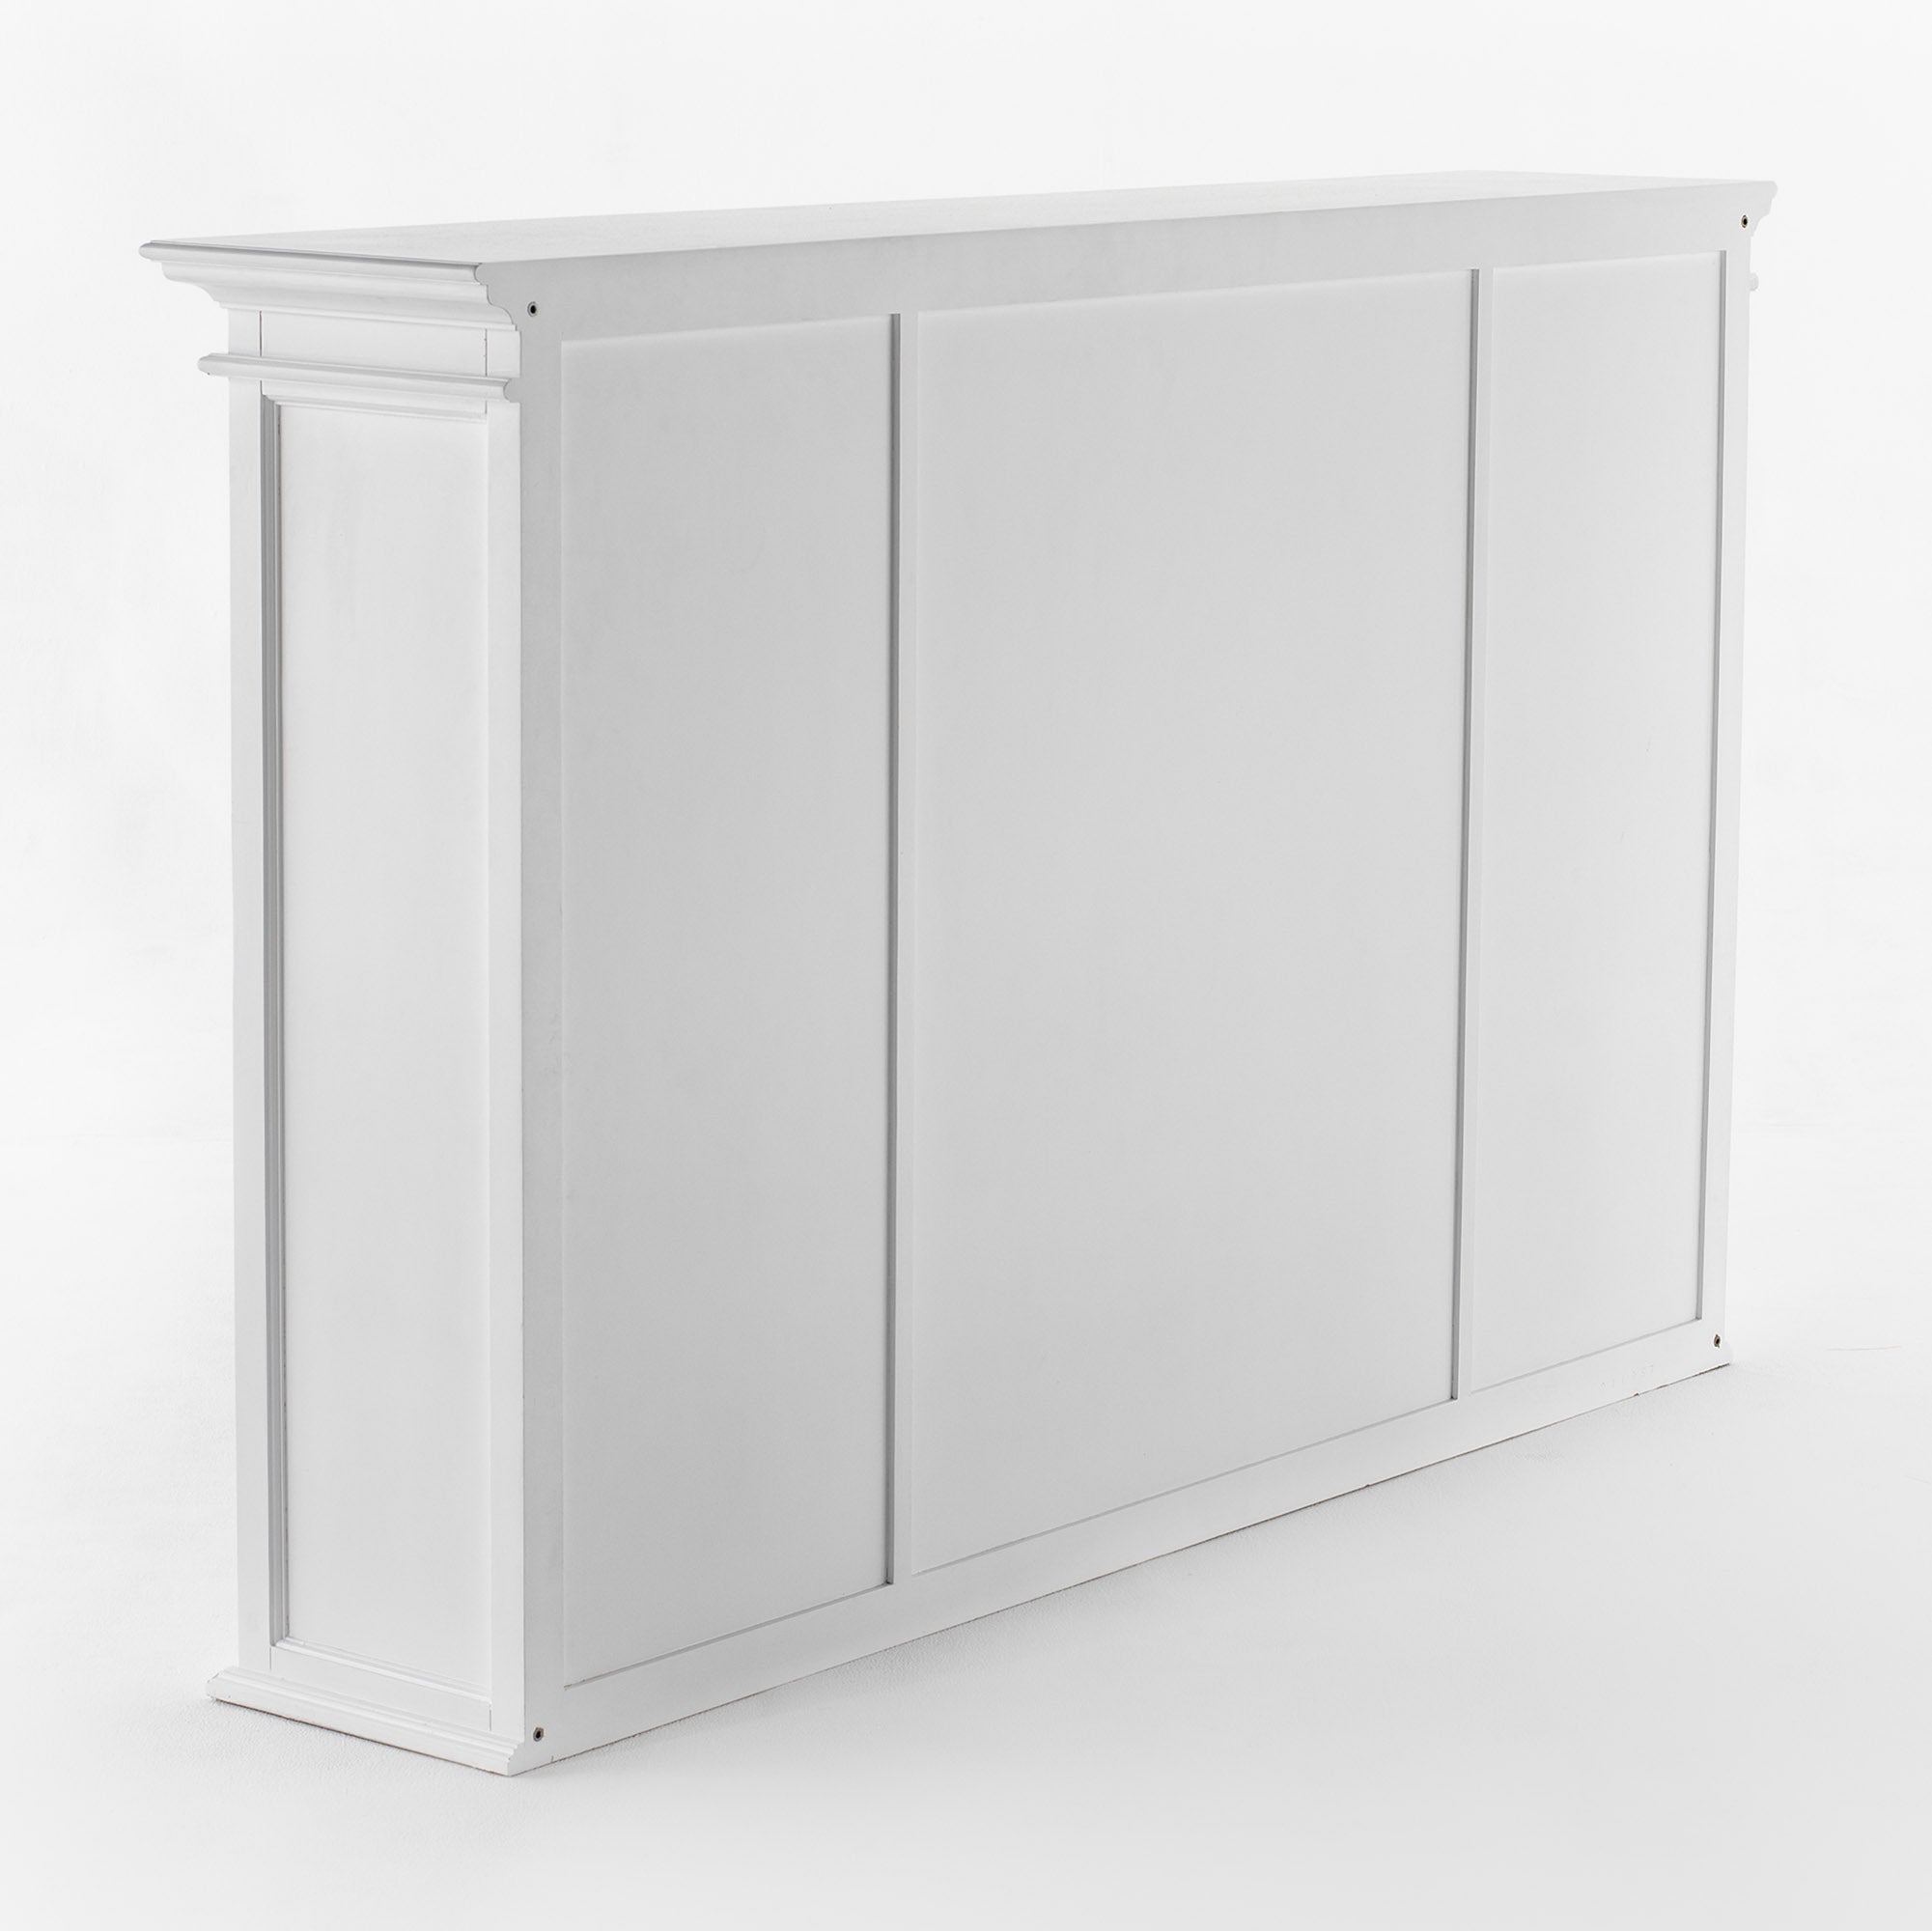 Halifax Coastal White Buffet Hutch Cabinet with 4 Glass Doors